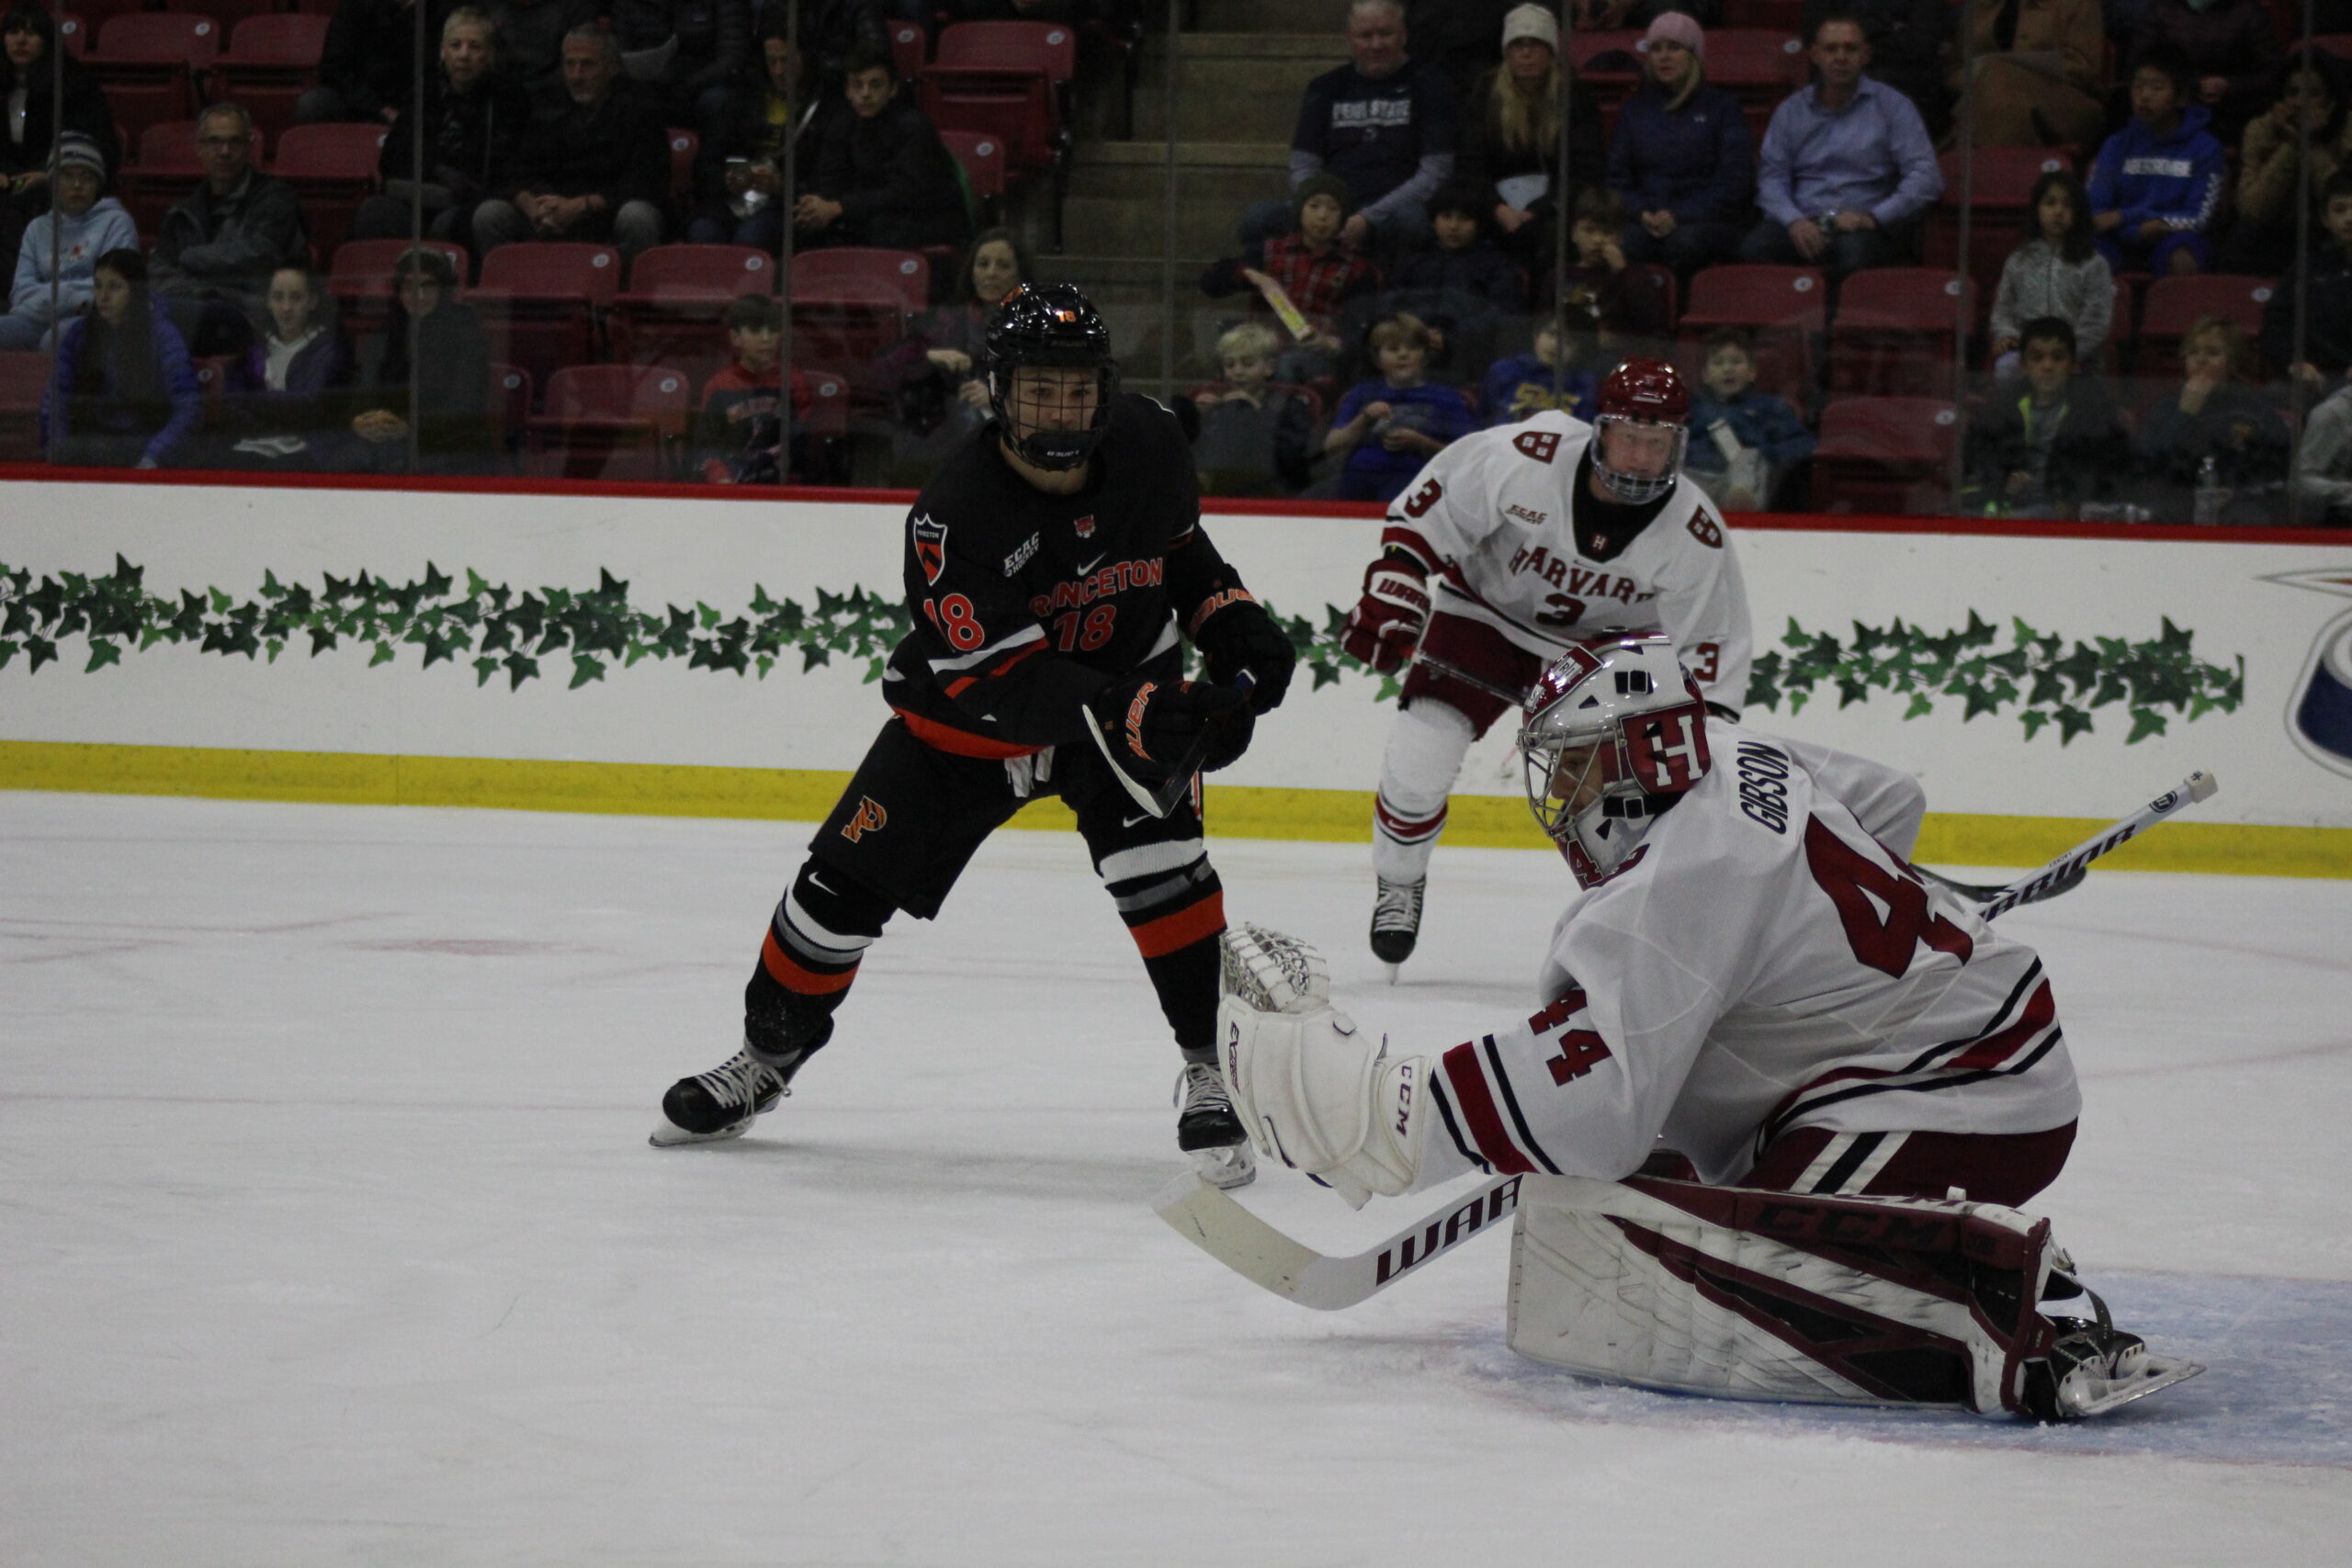 Gibson Shuts Out Princeton in Debut